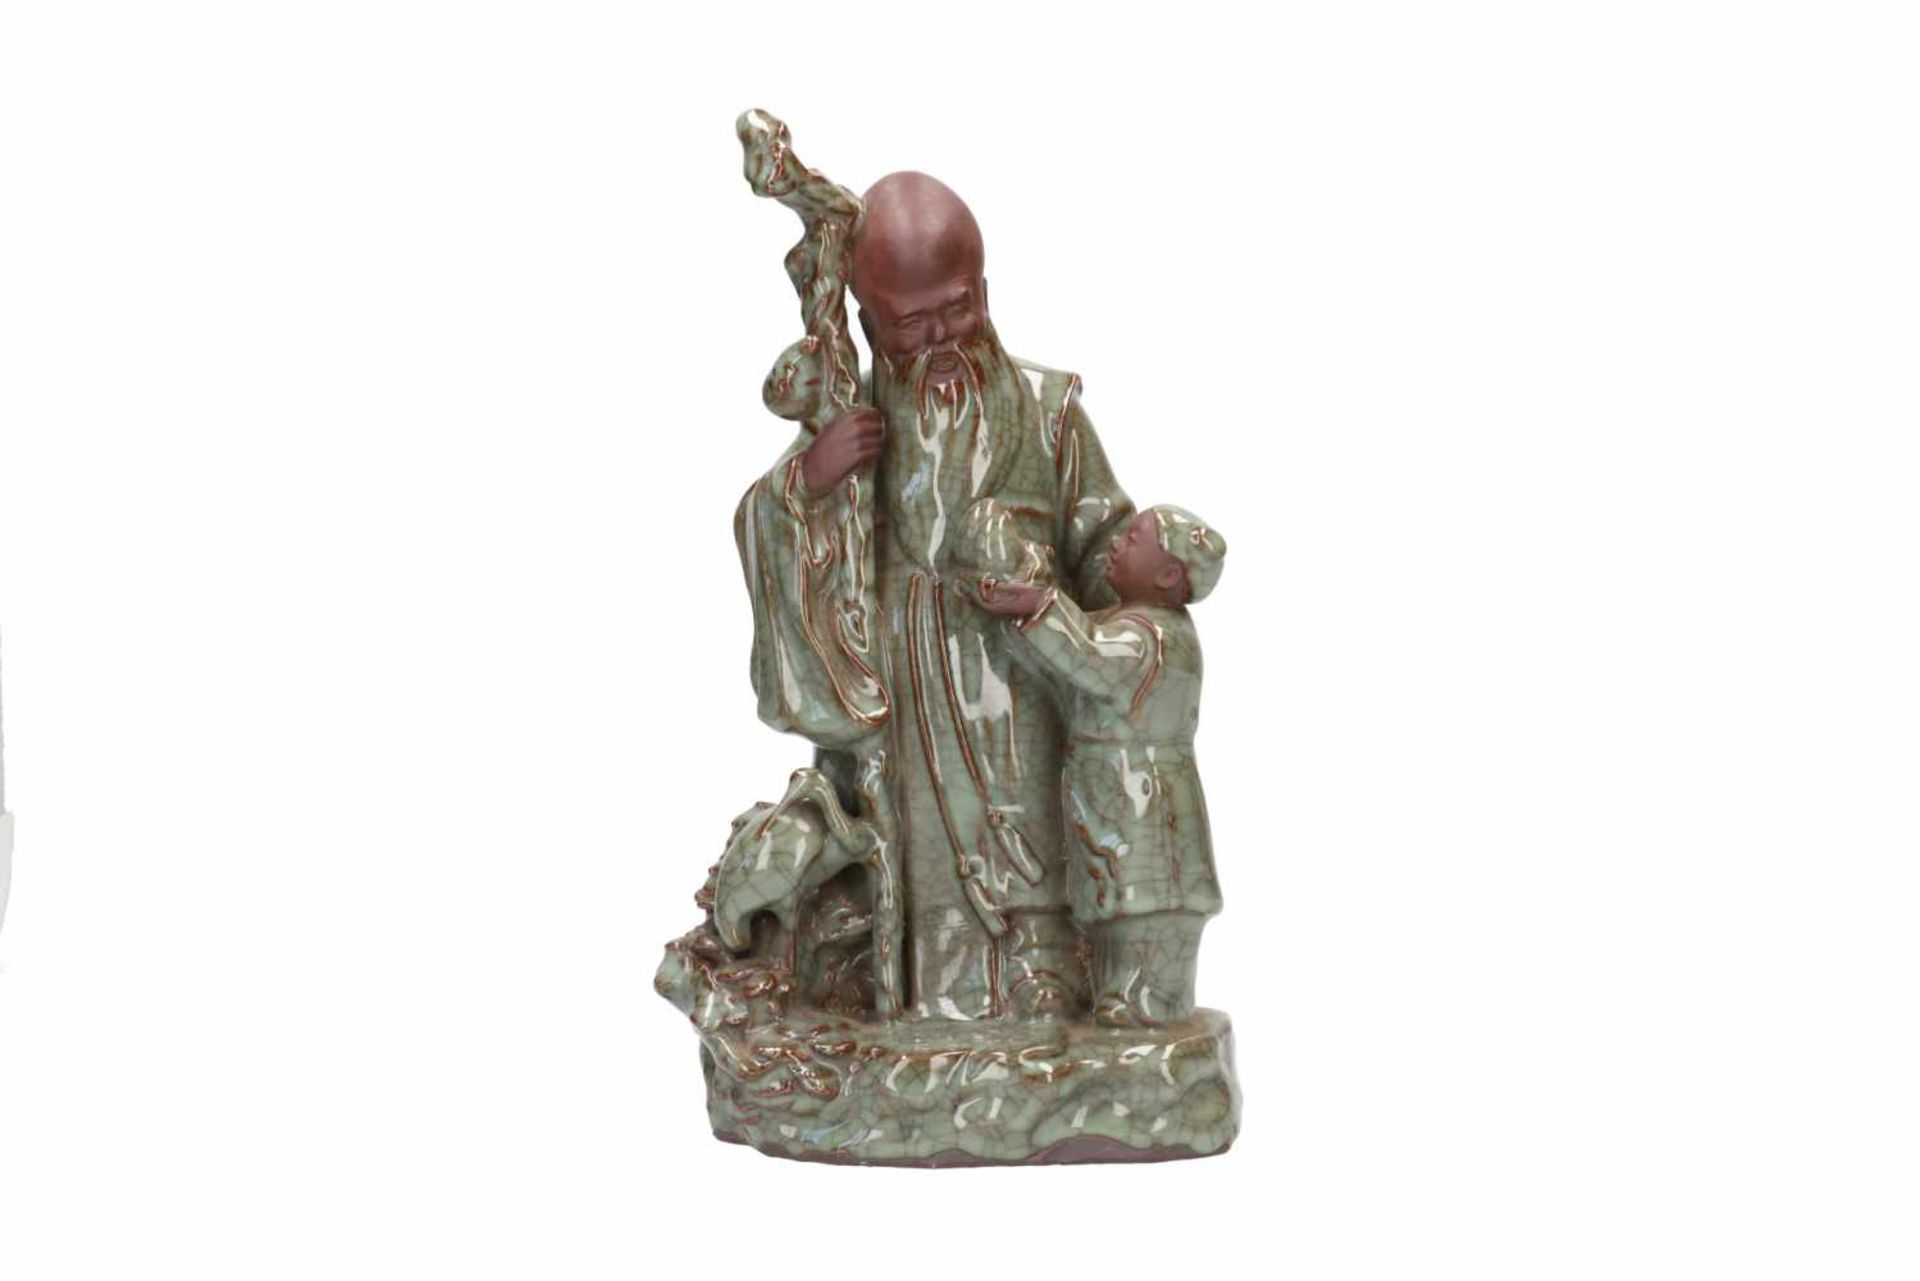 A glazed ceramic sculpture depicting an old man and a child. Unmarked. China, Lonzquan, 20th